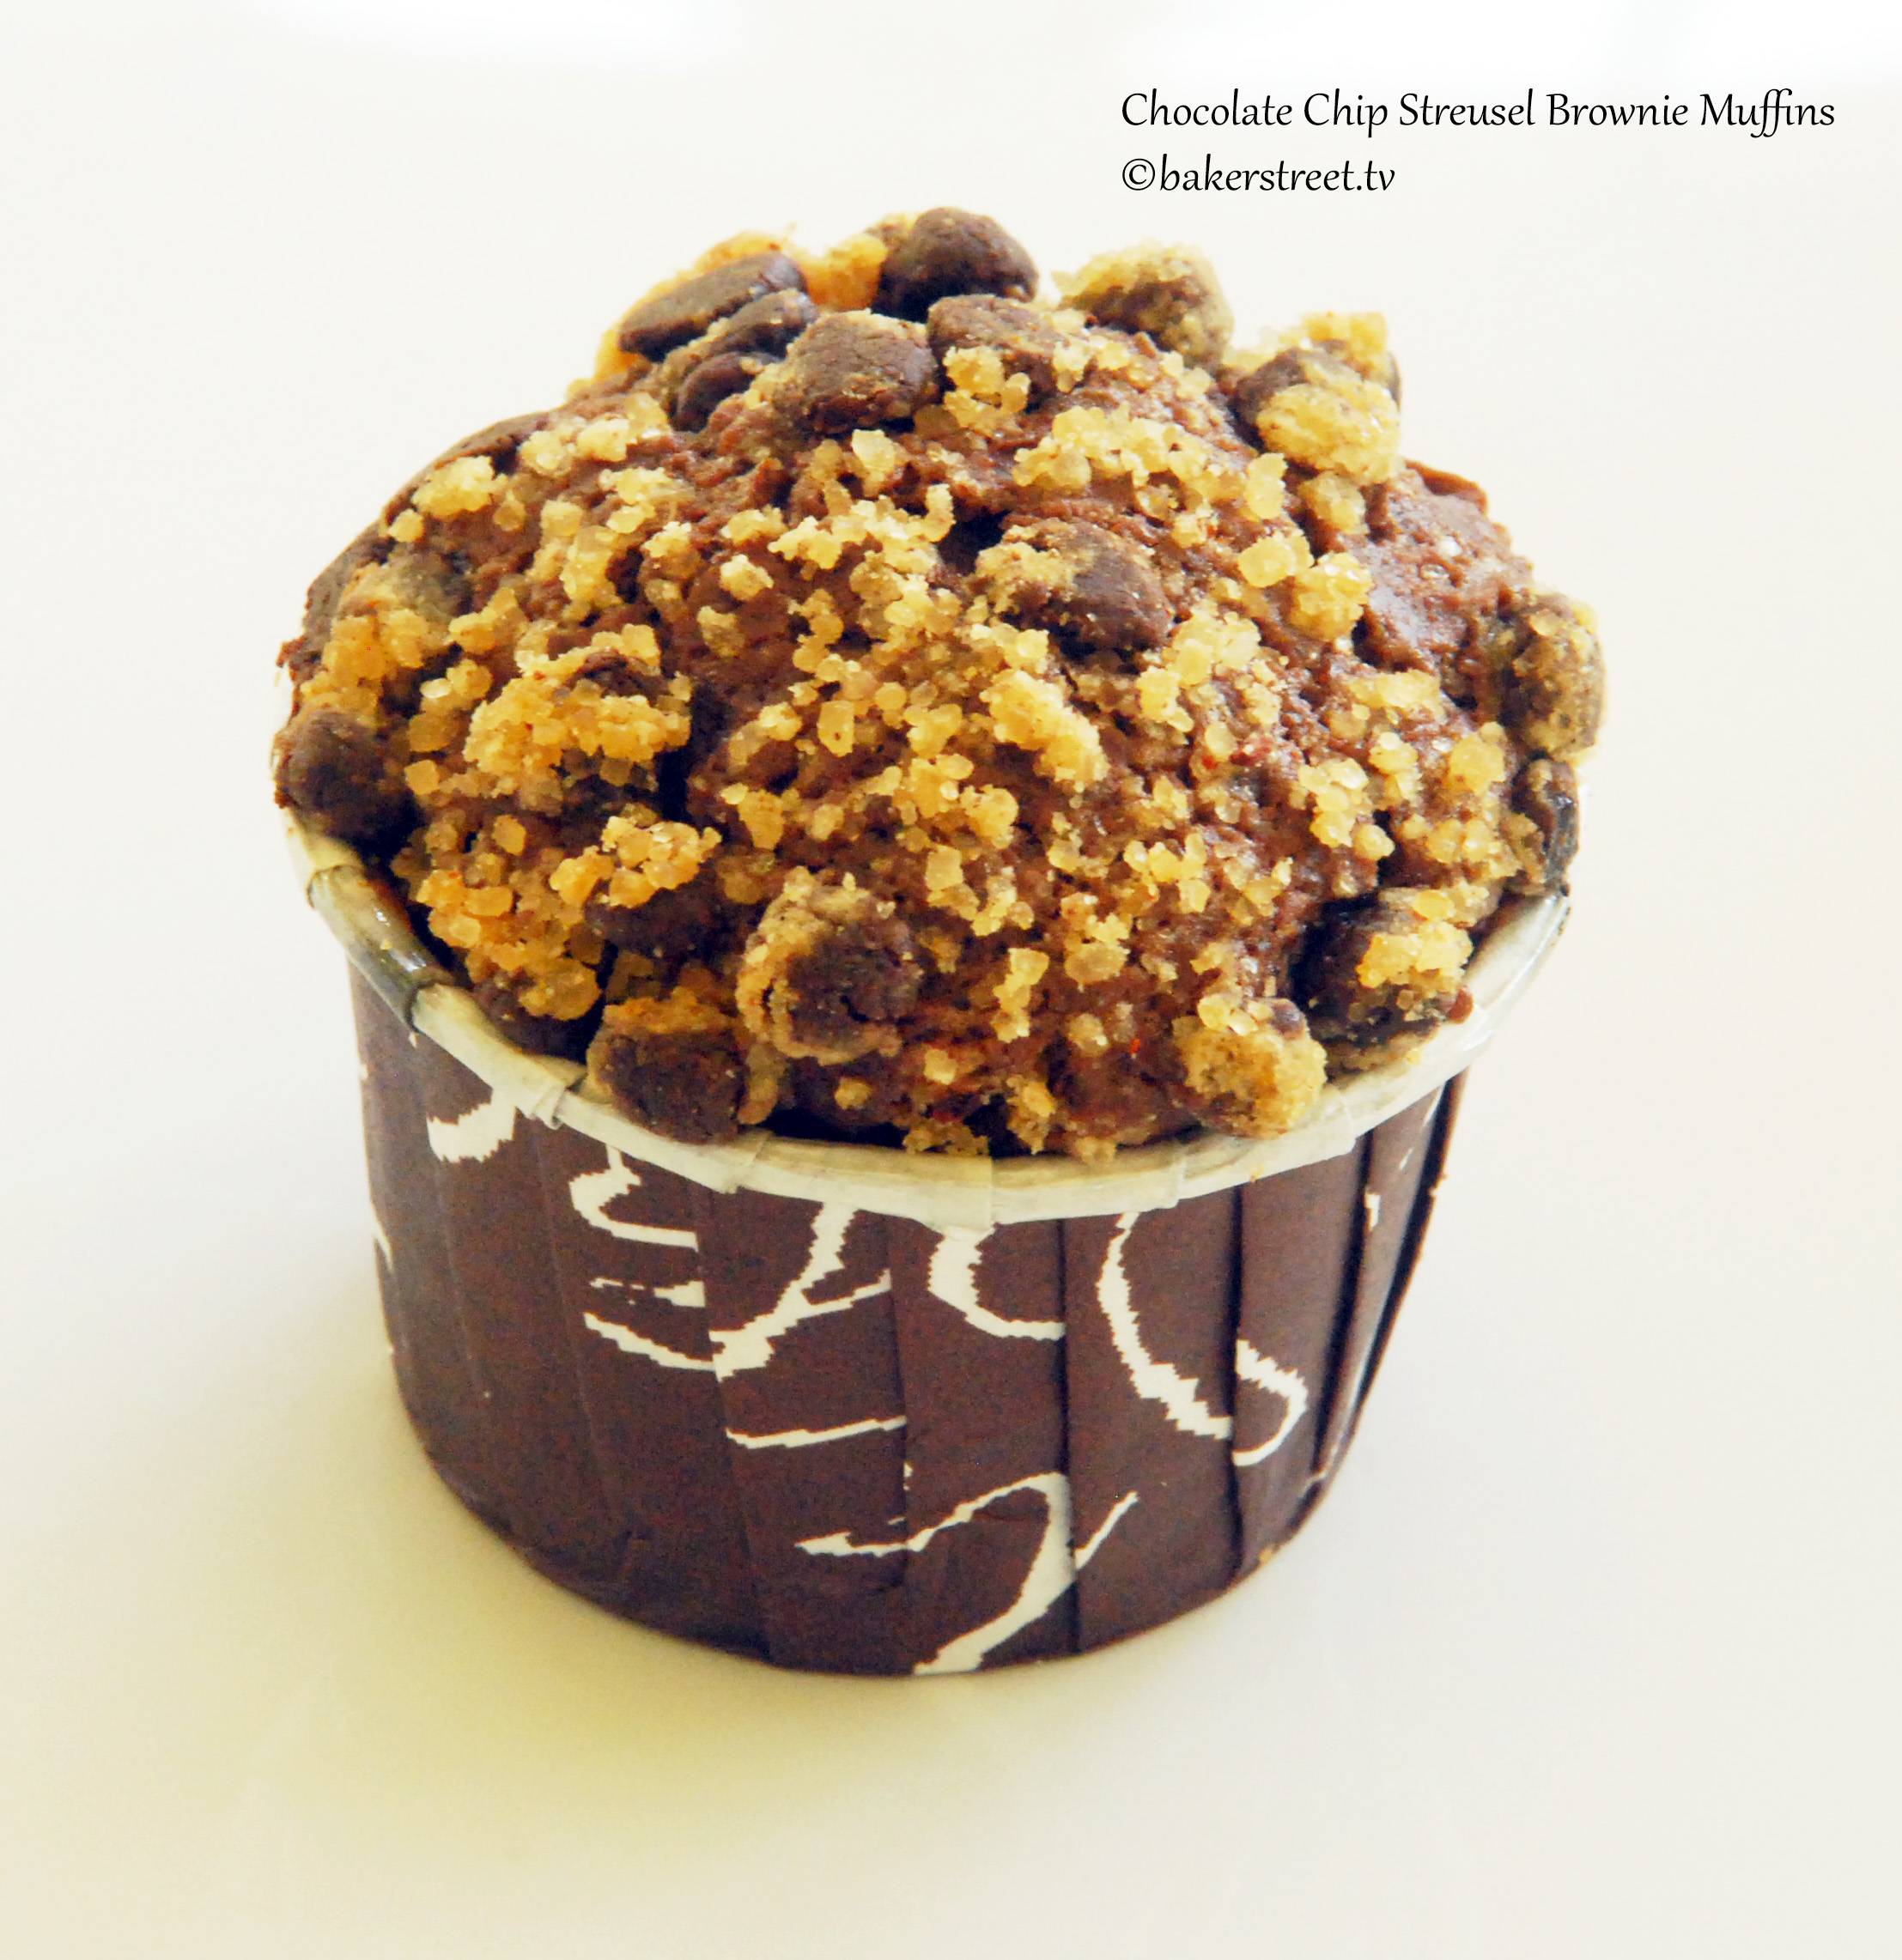 Chocolate Chip Streusel Brownie Muffins